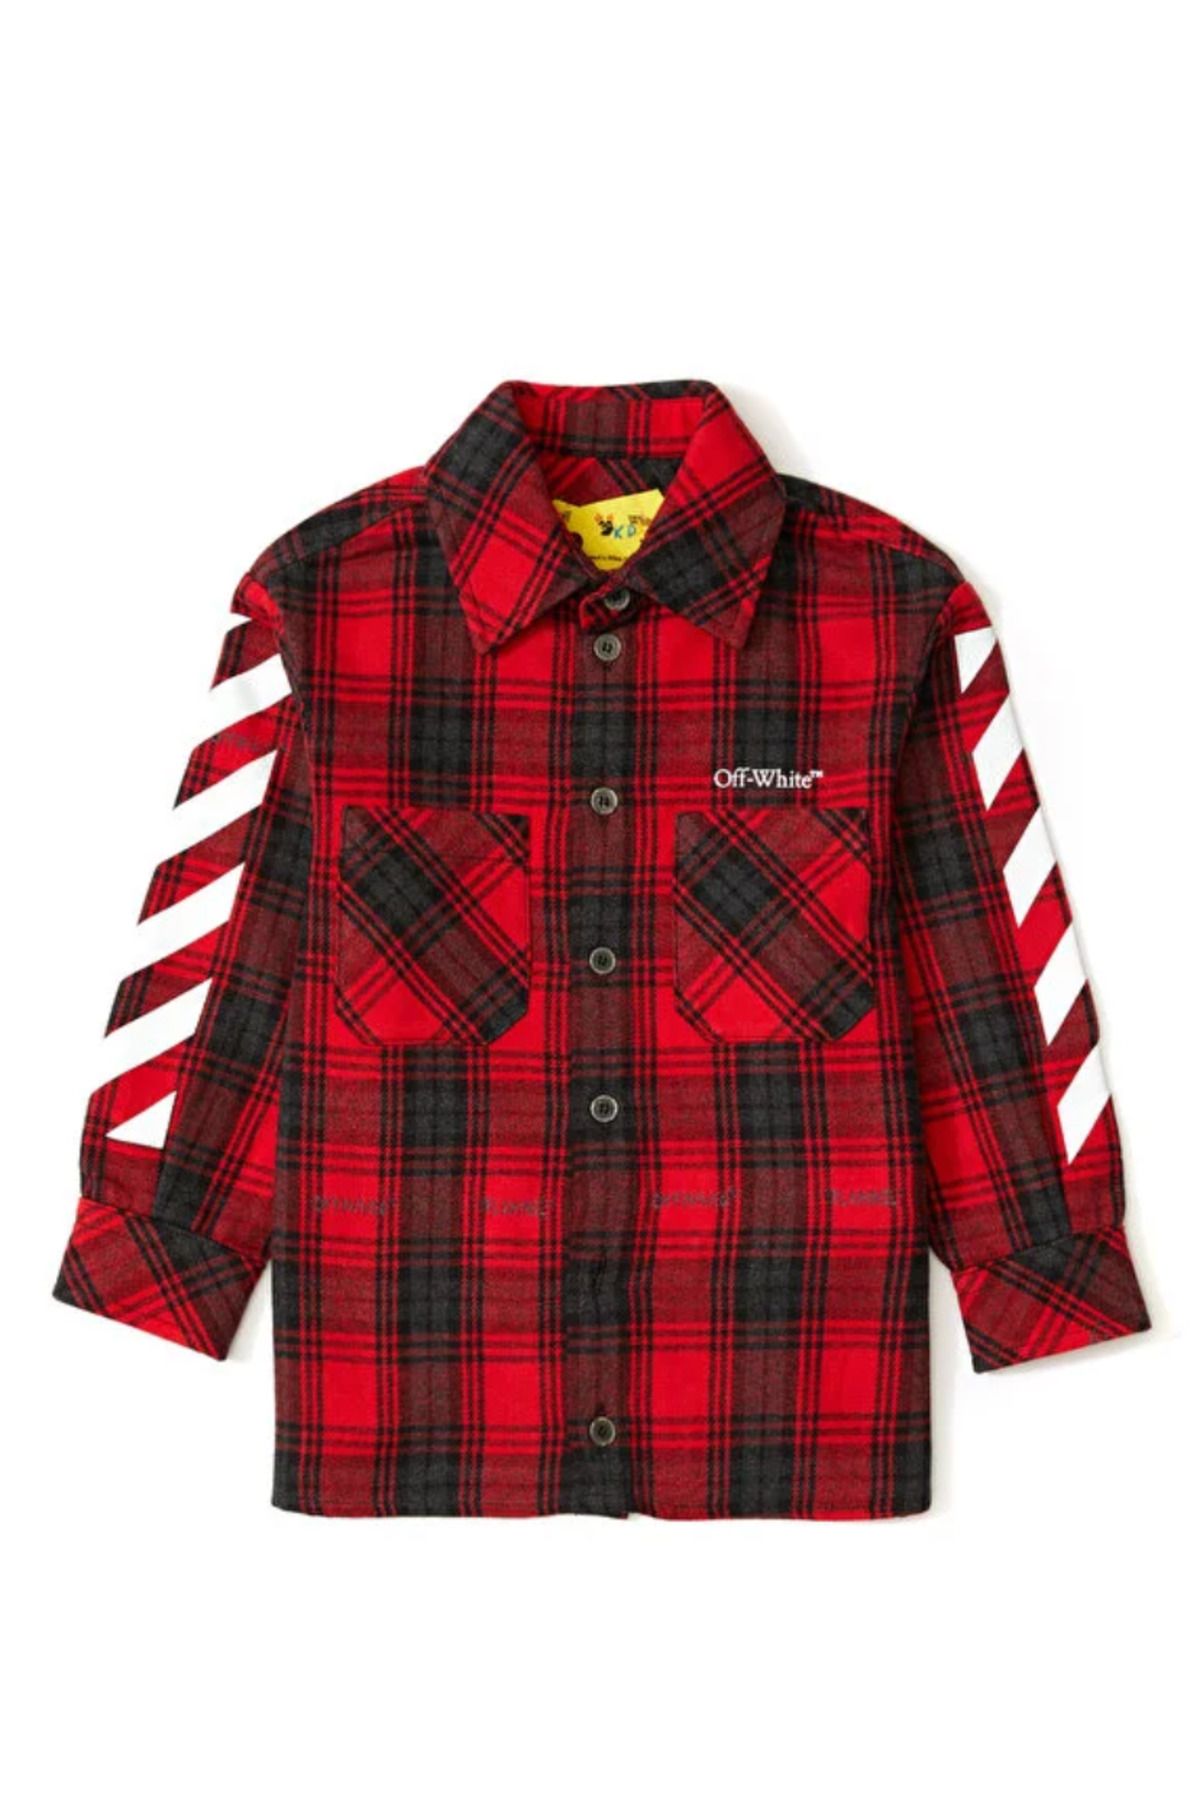 OFF WHITE Bookish Diag Flannel Shirt